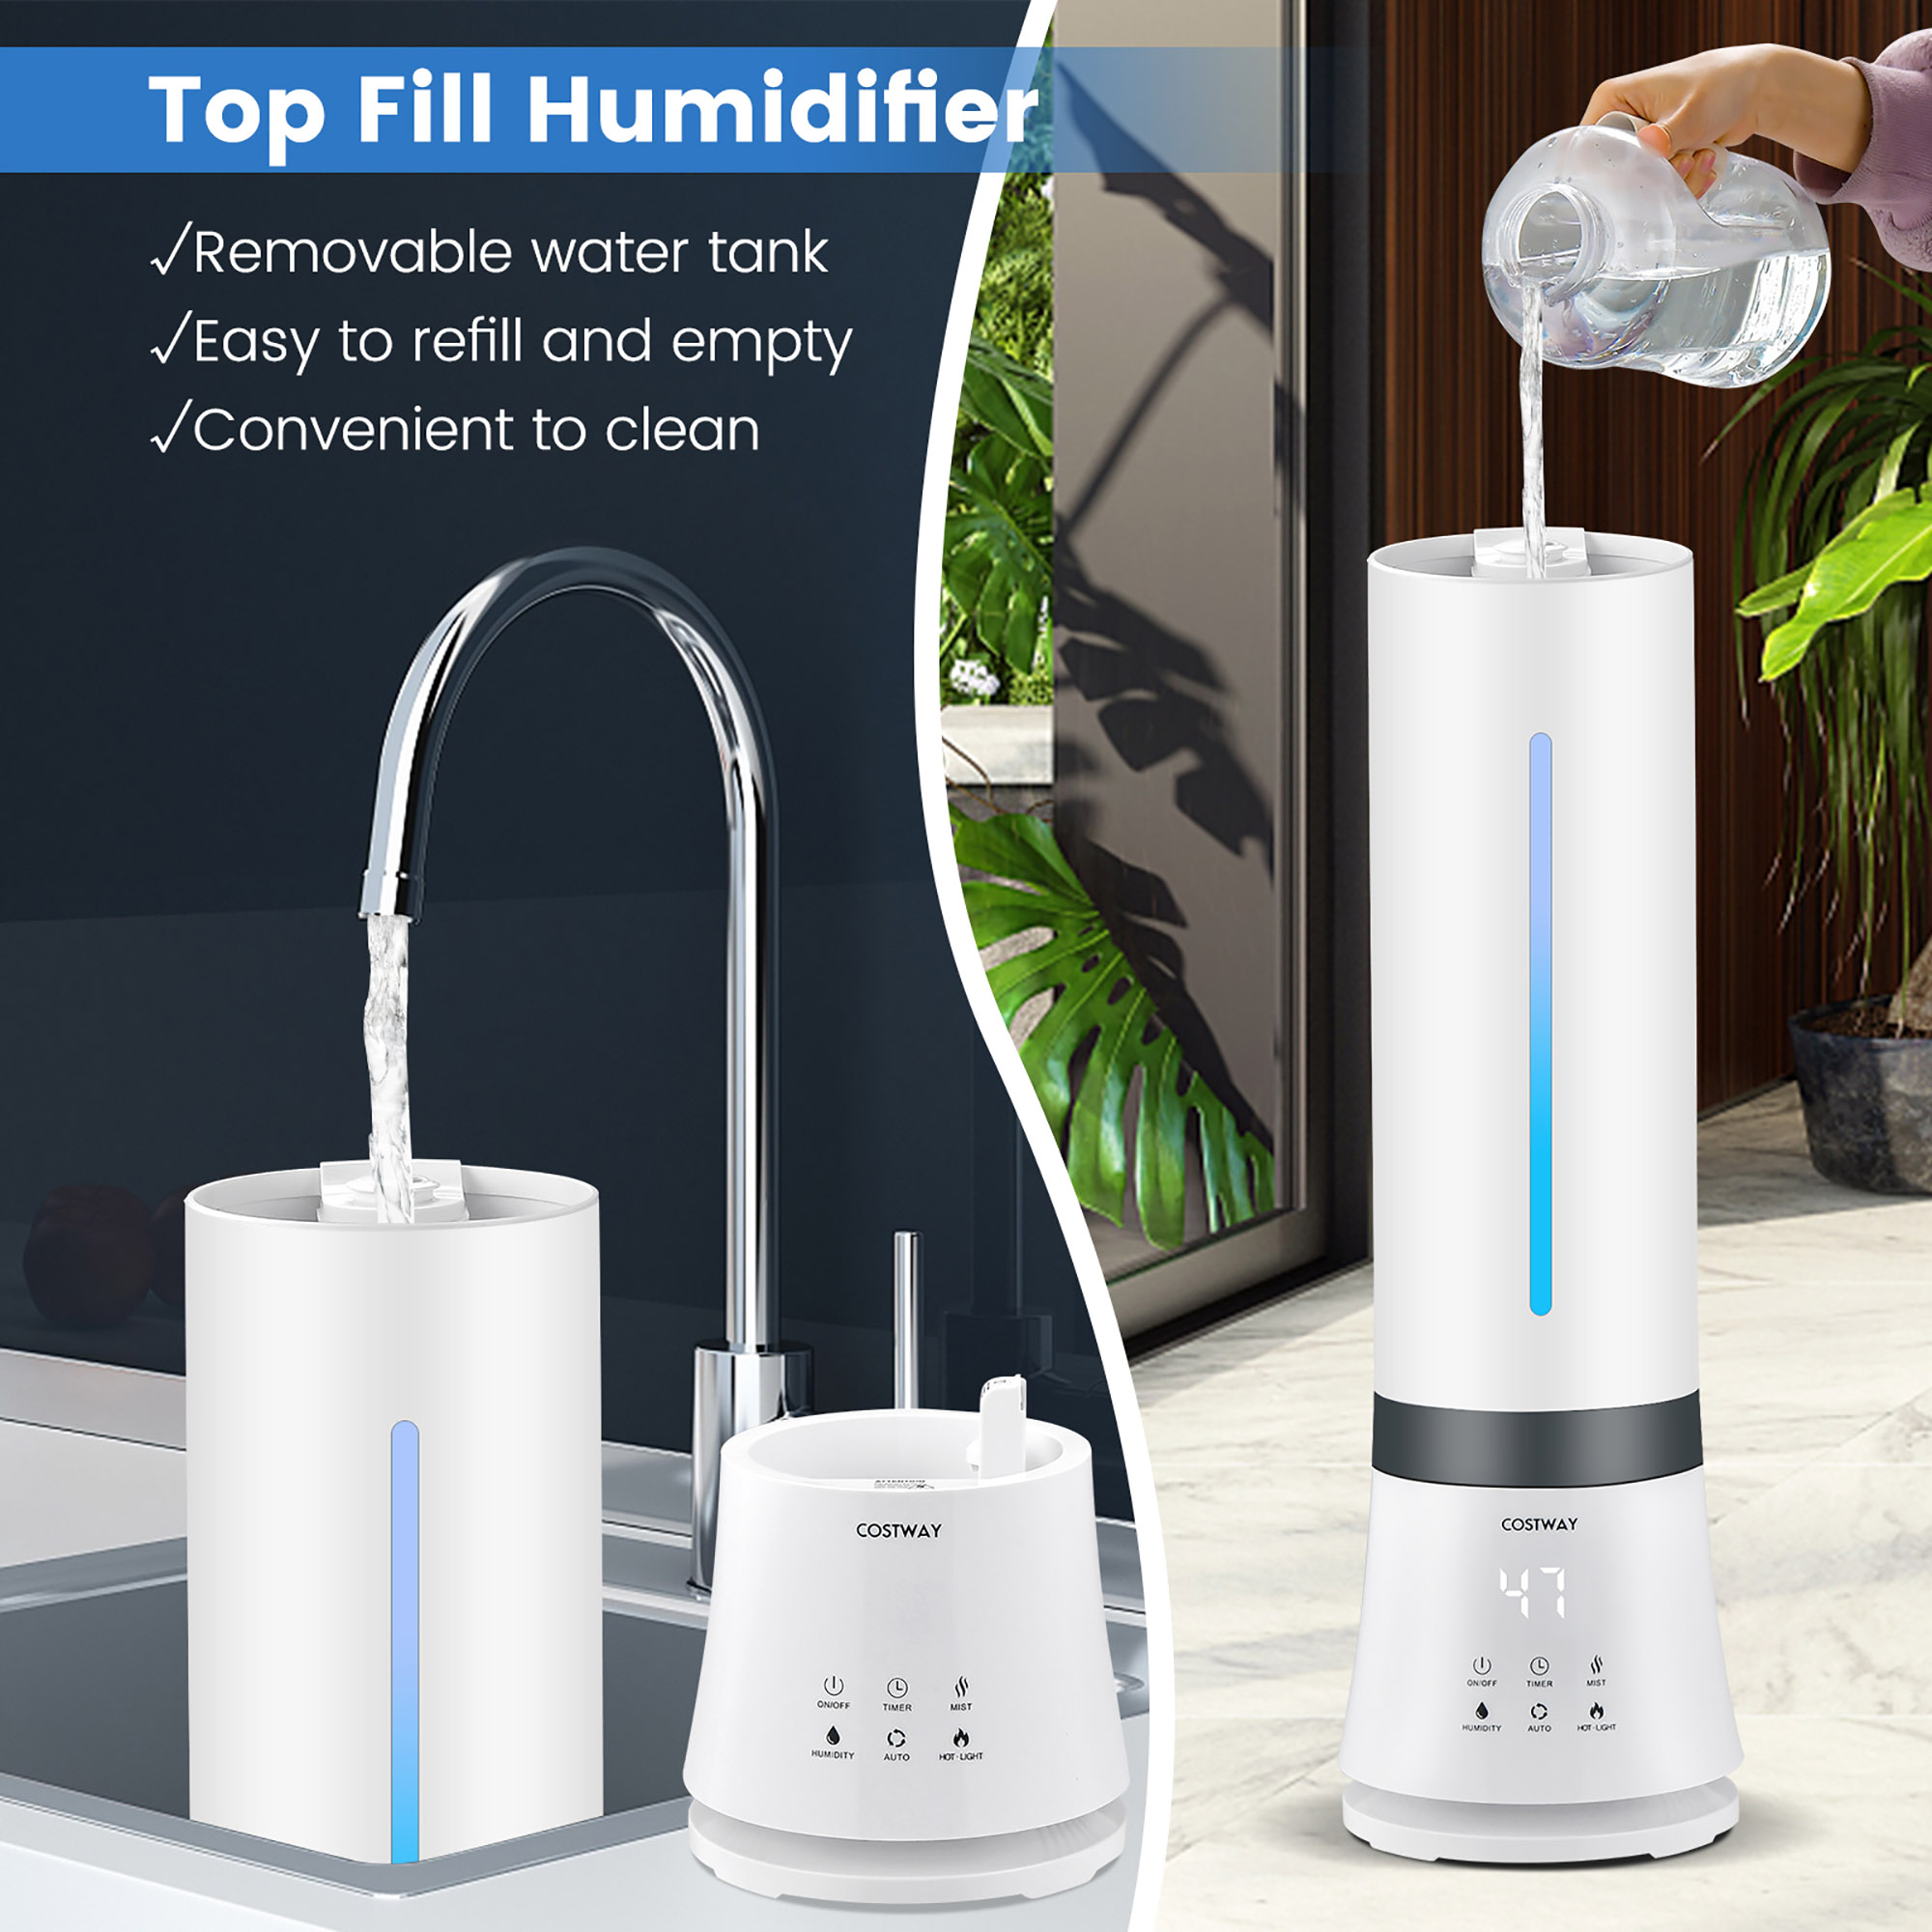 Costway Humidifier for Large Room 9L Warm & Cool Mist Top Fill Ultrasonic Air Vaporizer